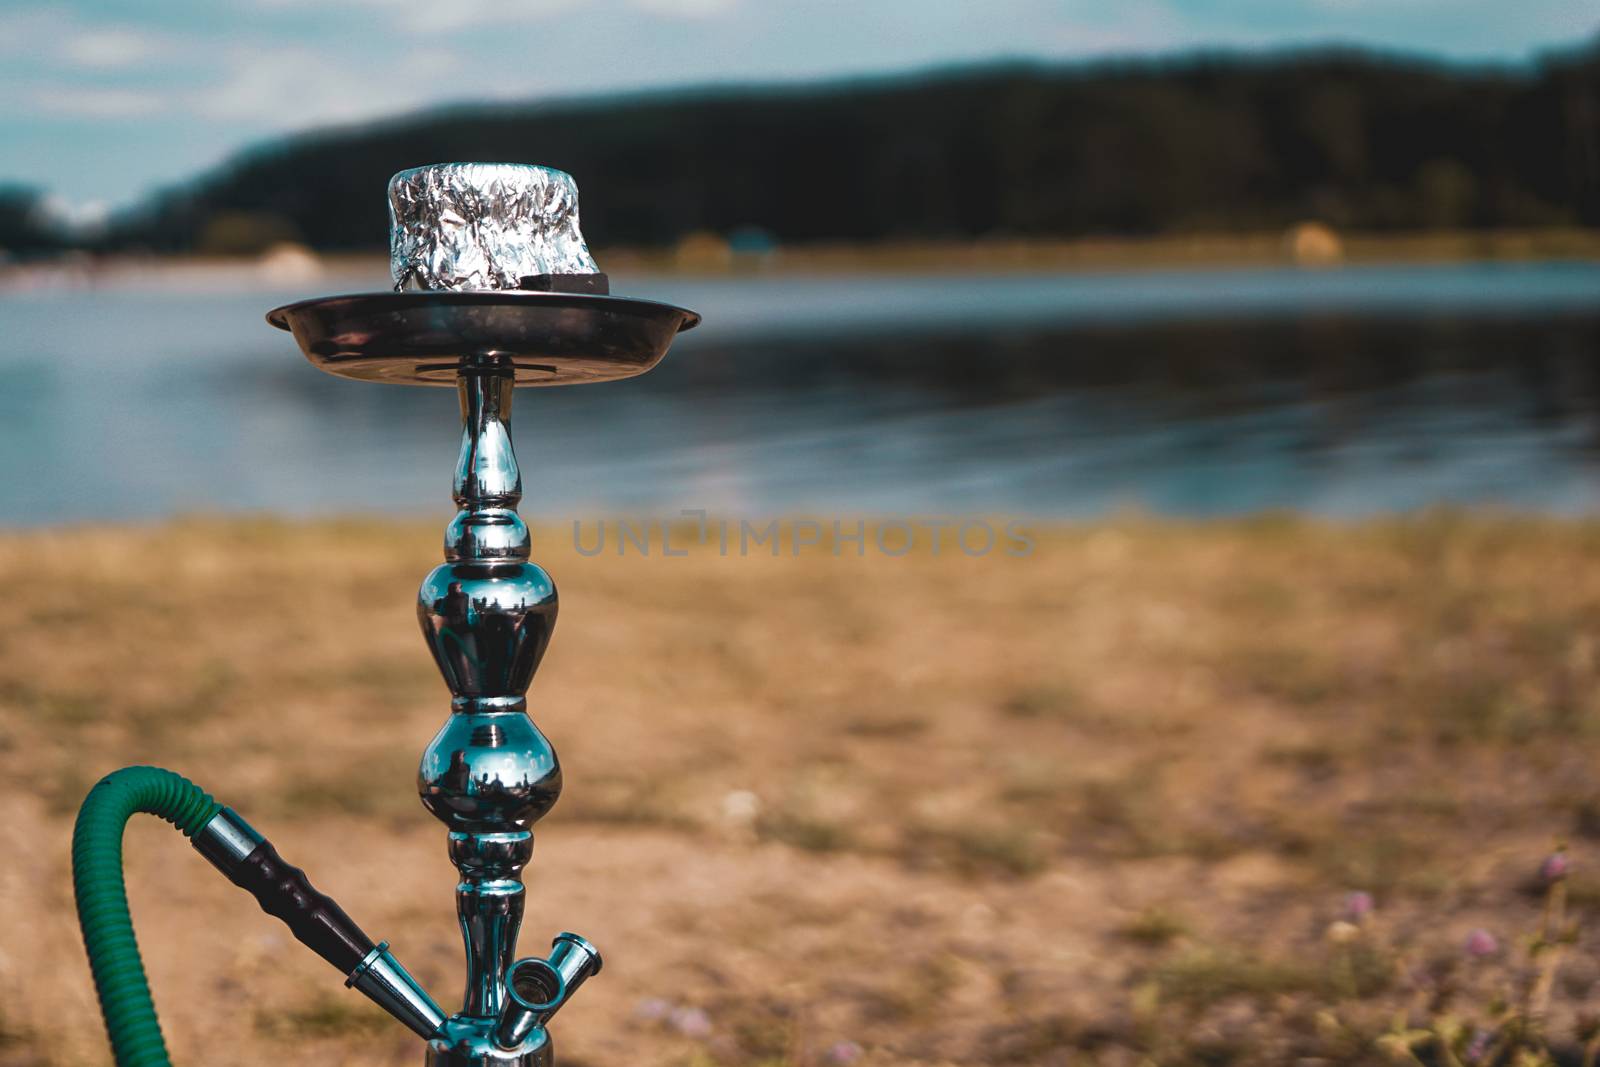 Hookah bowl stands in nature by the river close up by natali_brill